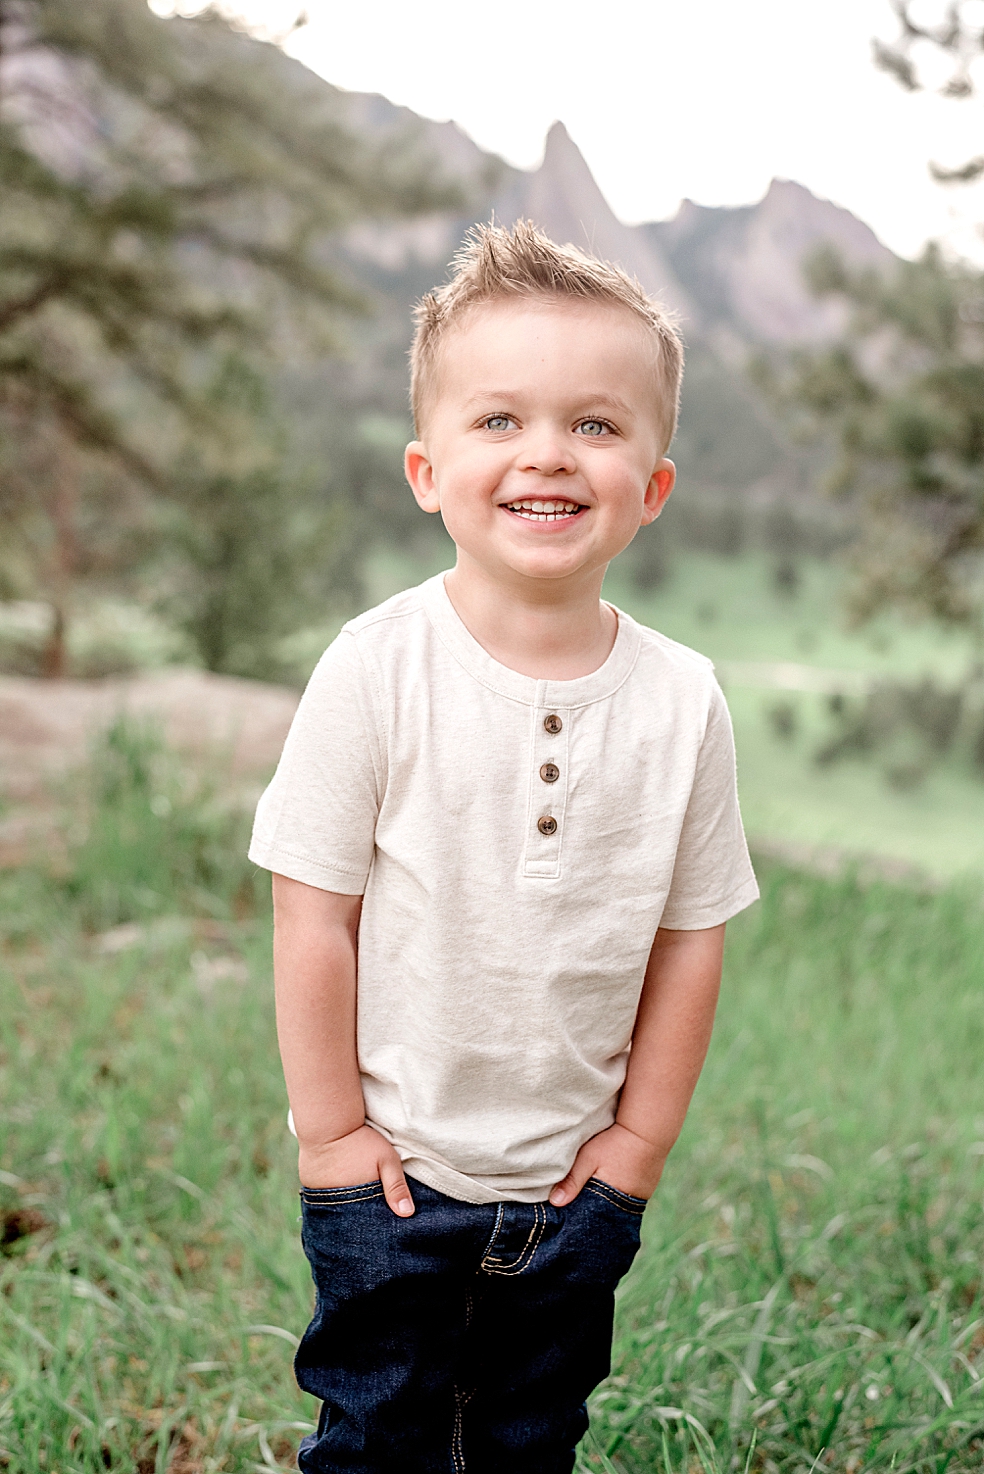 Little boy in cream shirt smiling at the camera | Photo by Decatur Alabama Family Photographer Jessica Lee